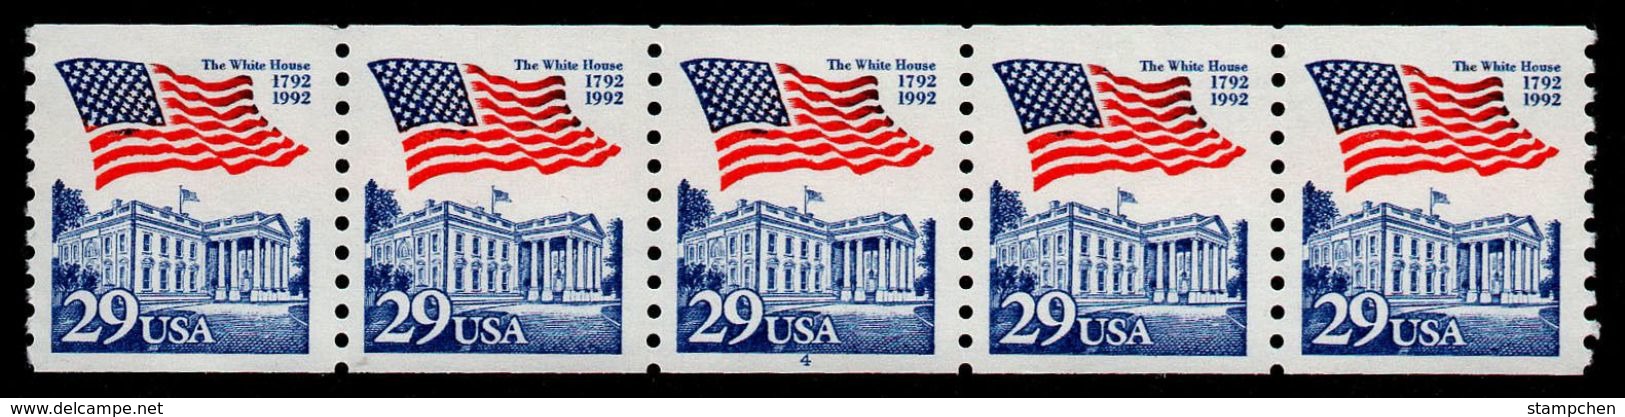 Strip Of 5-PNC # 4 -1992 USA Flag Over The White House Coil Stamp Sc#2609 Post Plate Number Coil - Rollenmarken (Plattennummern)